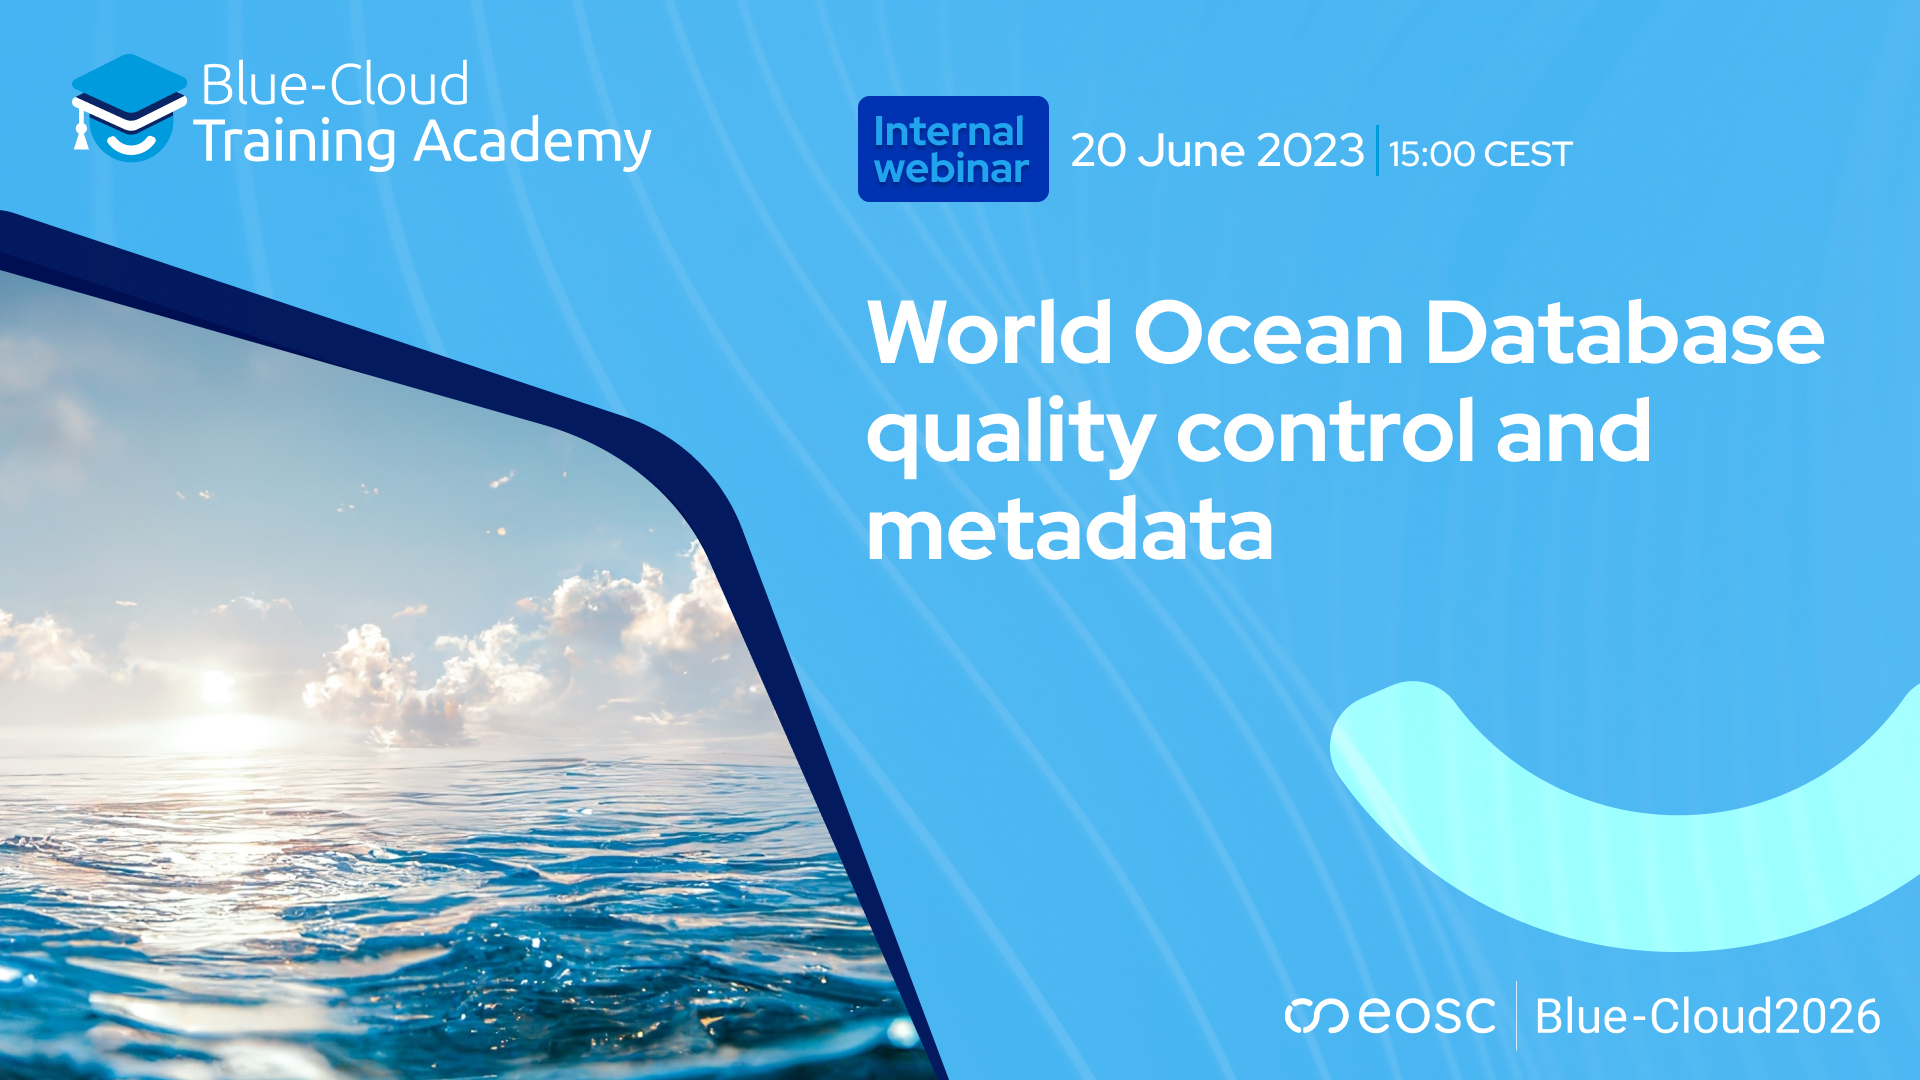 Advancing Quality Control and Metadata in the World Ocean Database